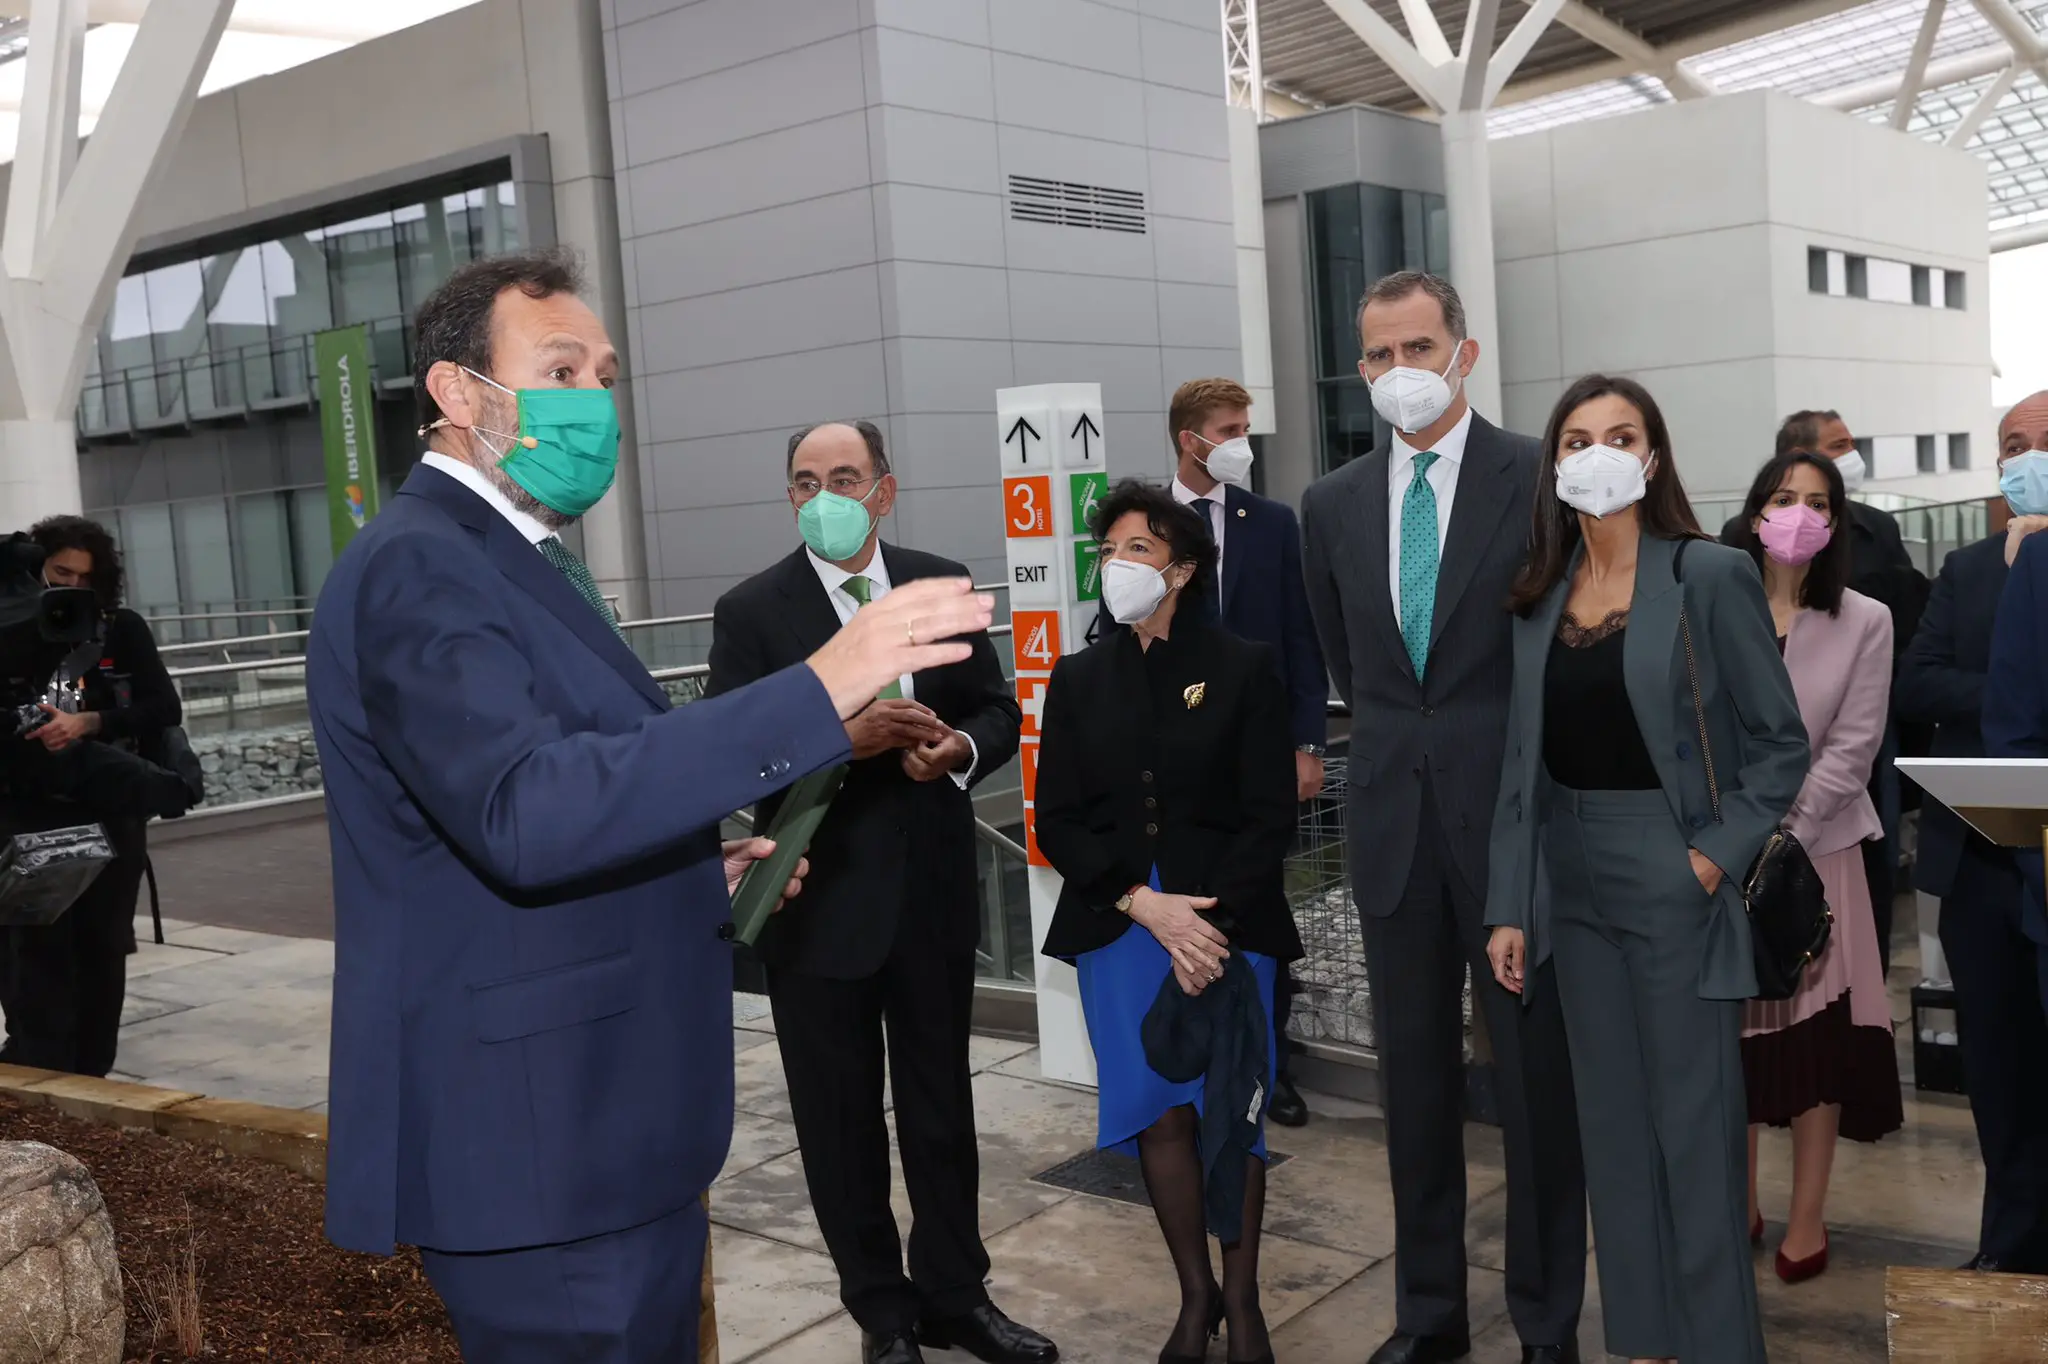 The King and Queen toured the Campus visiting the “Plaza Iberdrola” where “Iberdrola with biodiversity” is located